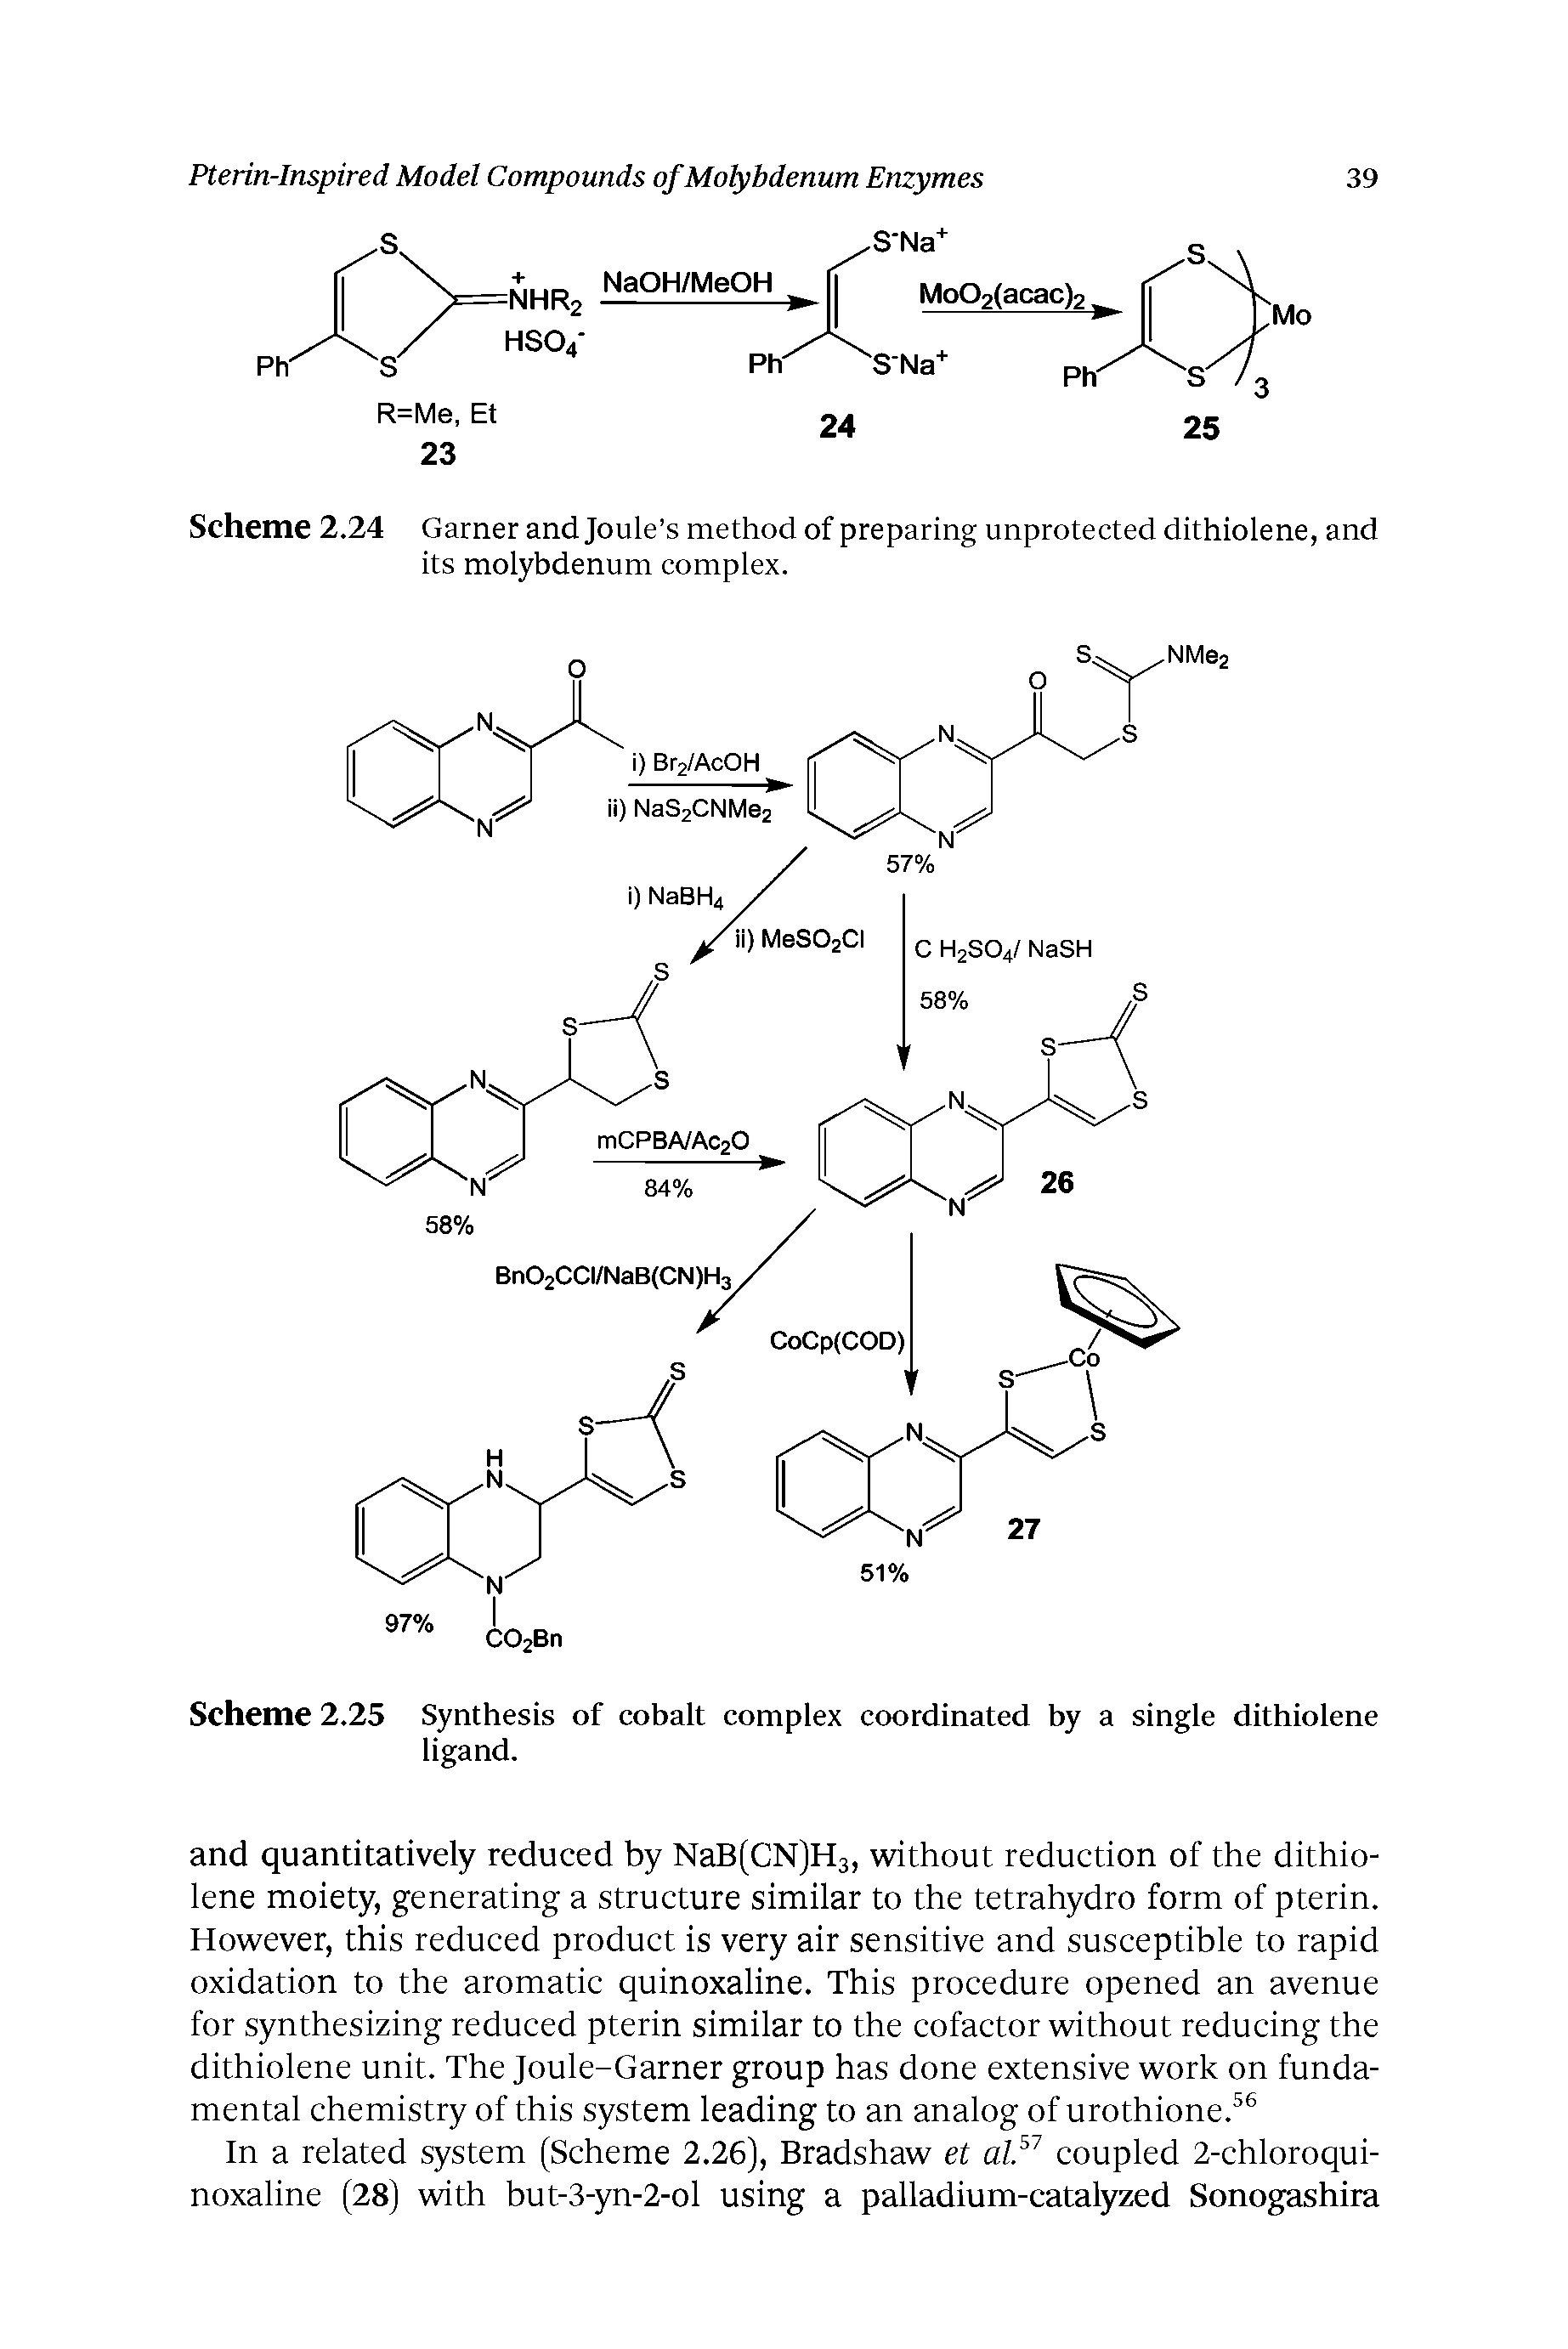 Scheme 2.25 Synthesis of cobalt complex coordinated by a single dithiolene ligand.